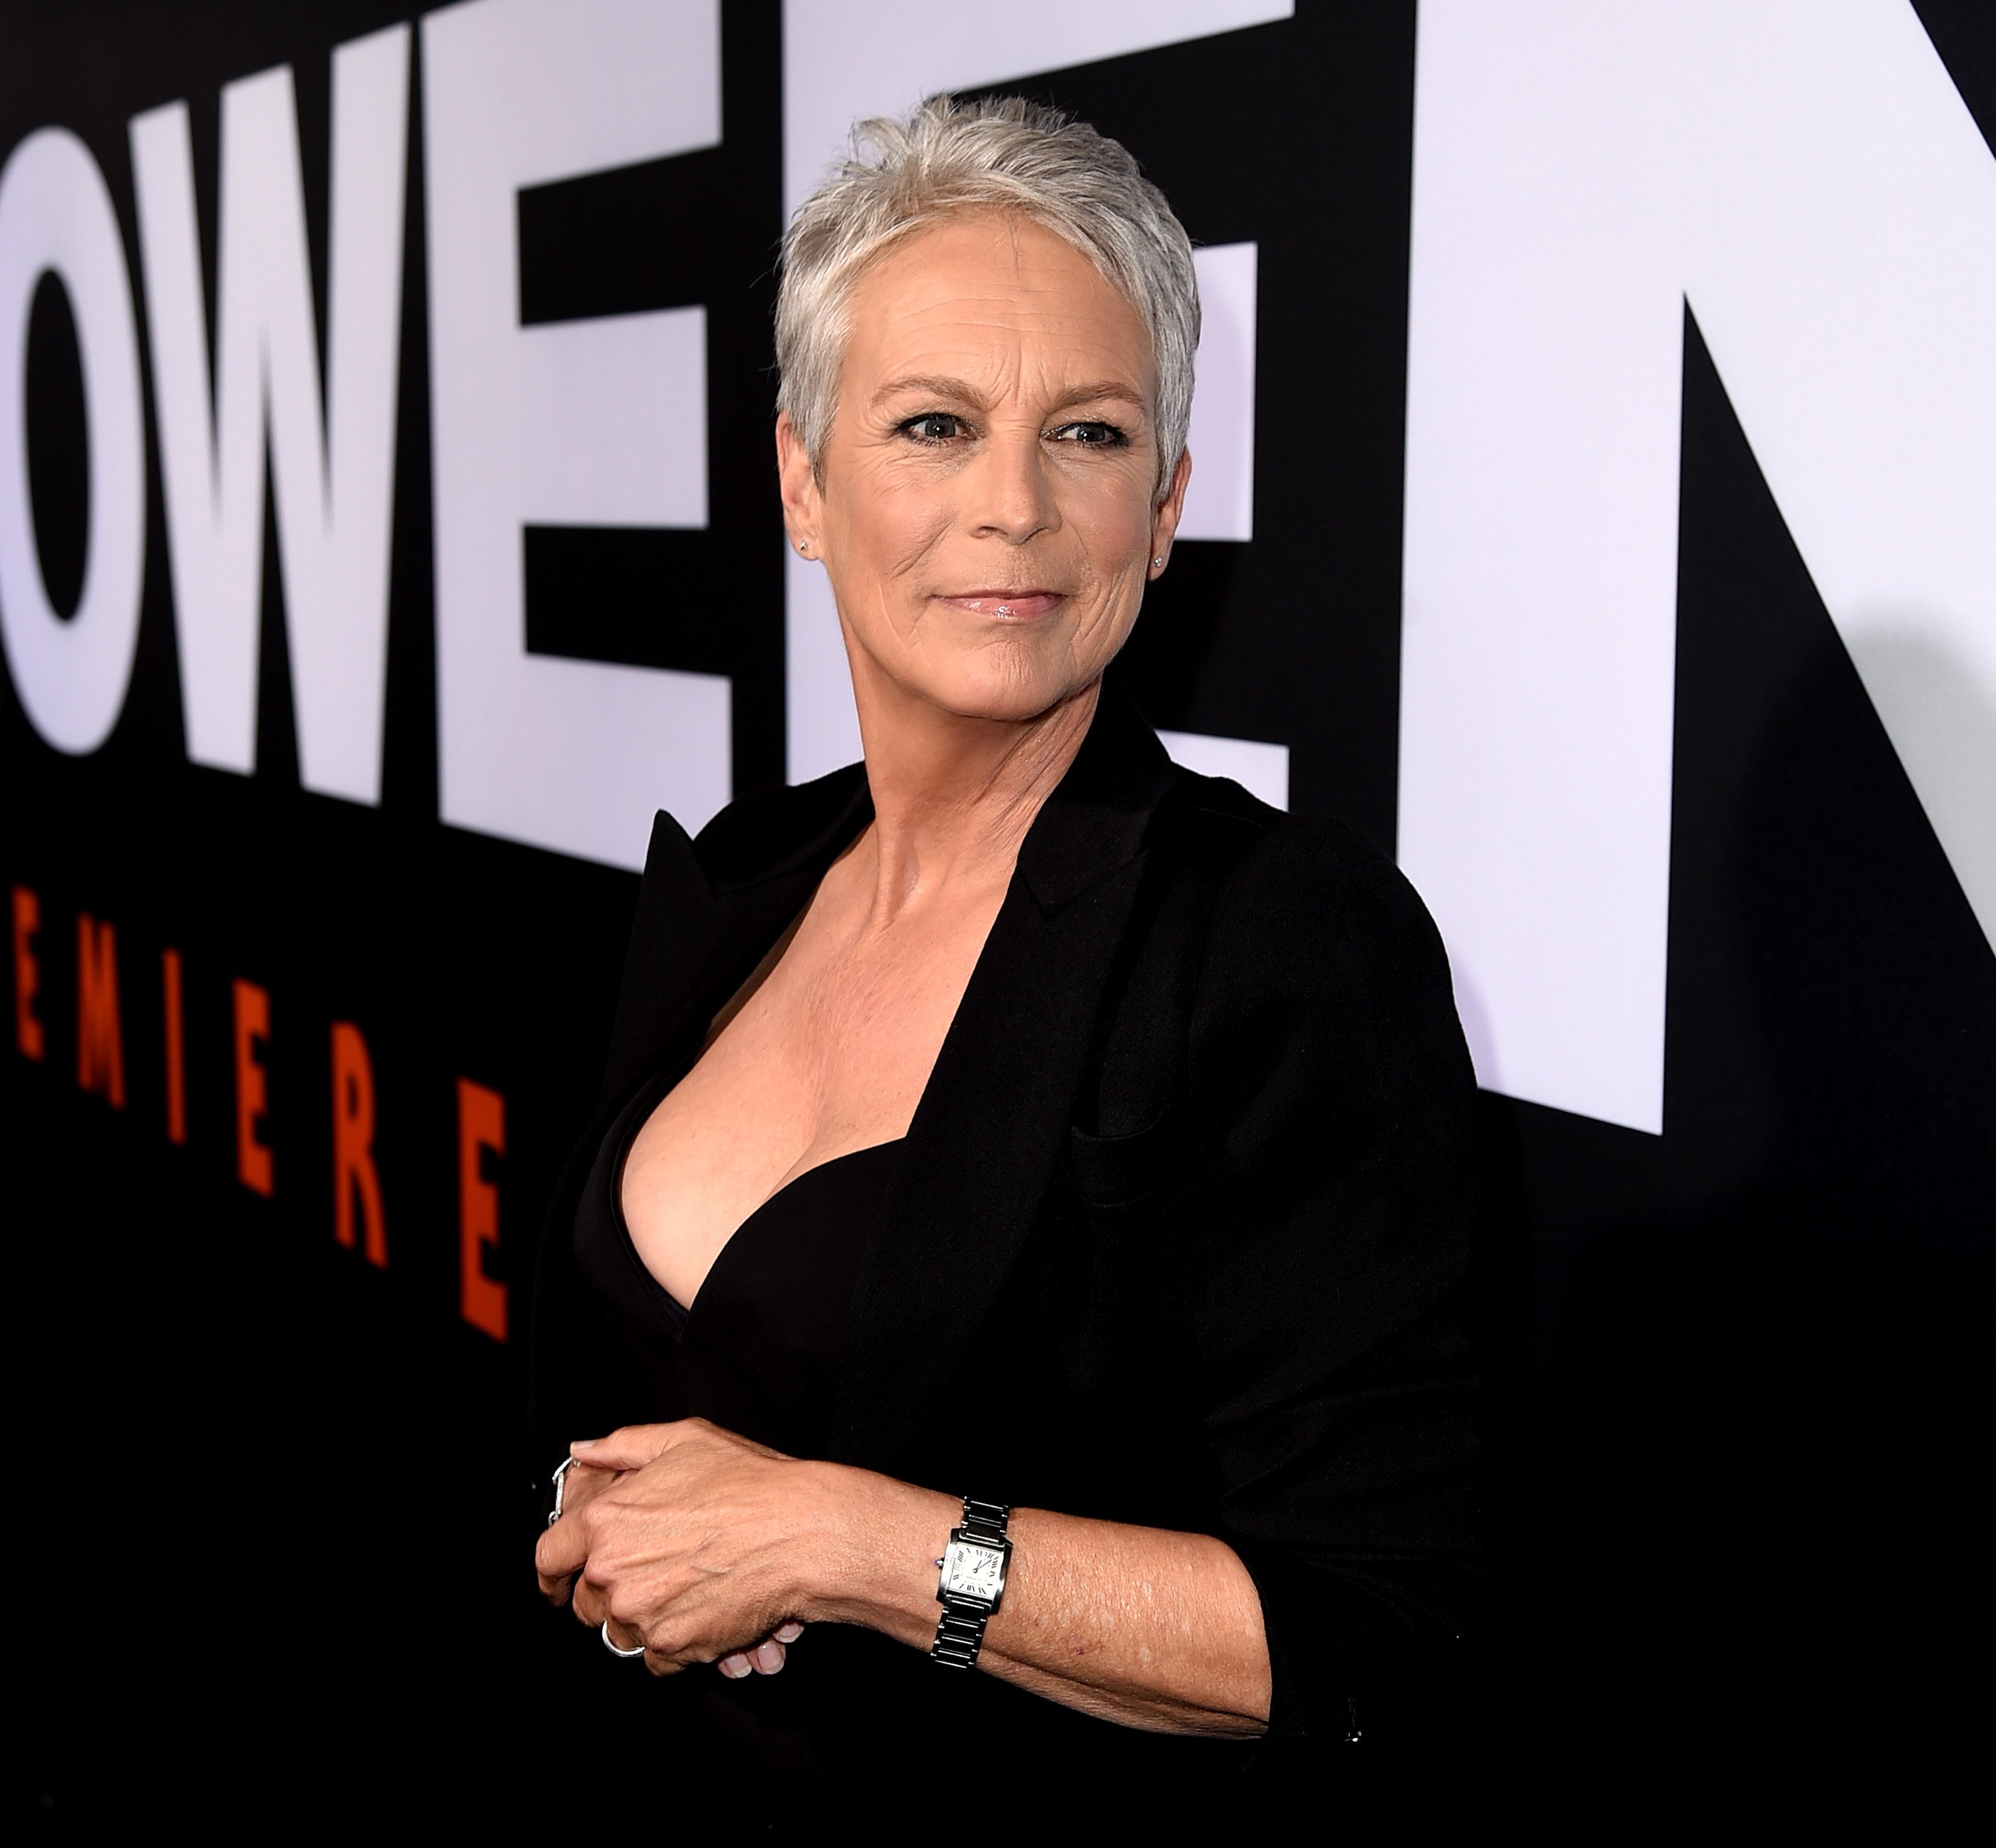 Jamie Lee Curtis attends the premiere of "Halloween" in Los Angeles, California on October 17, 2018 | Photo: Getty Images